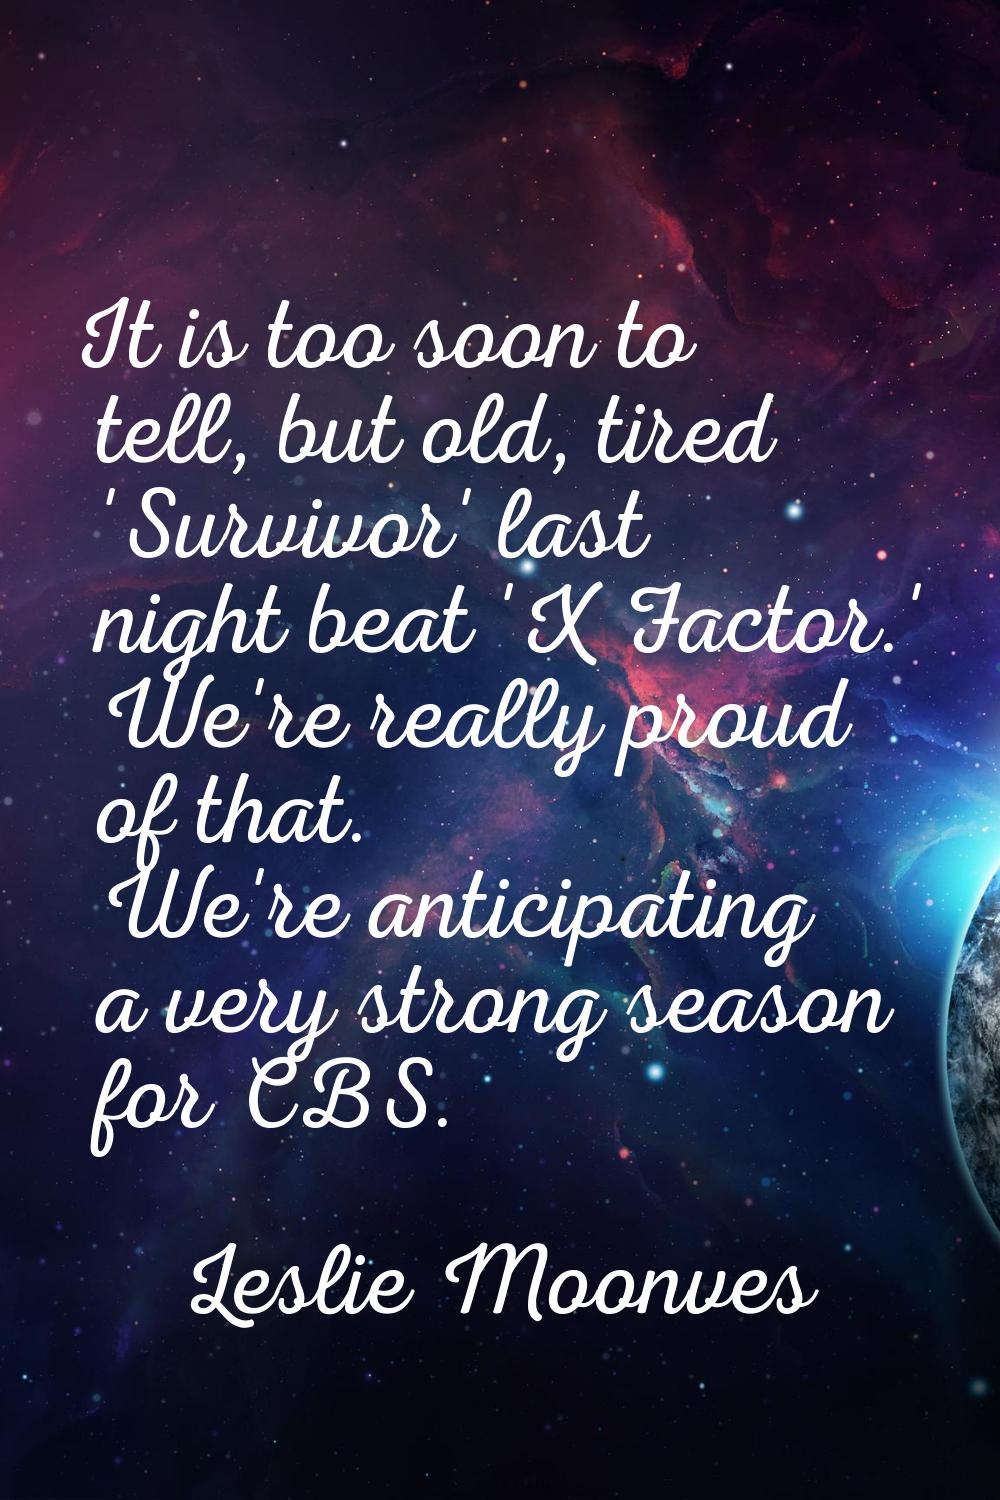 It is too soon to tell, but old, tired 'Survivor' last night beat 'X Factor.' We're really proud of